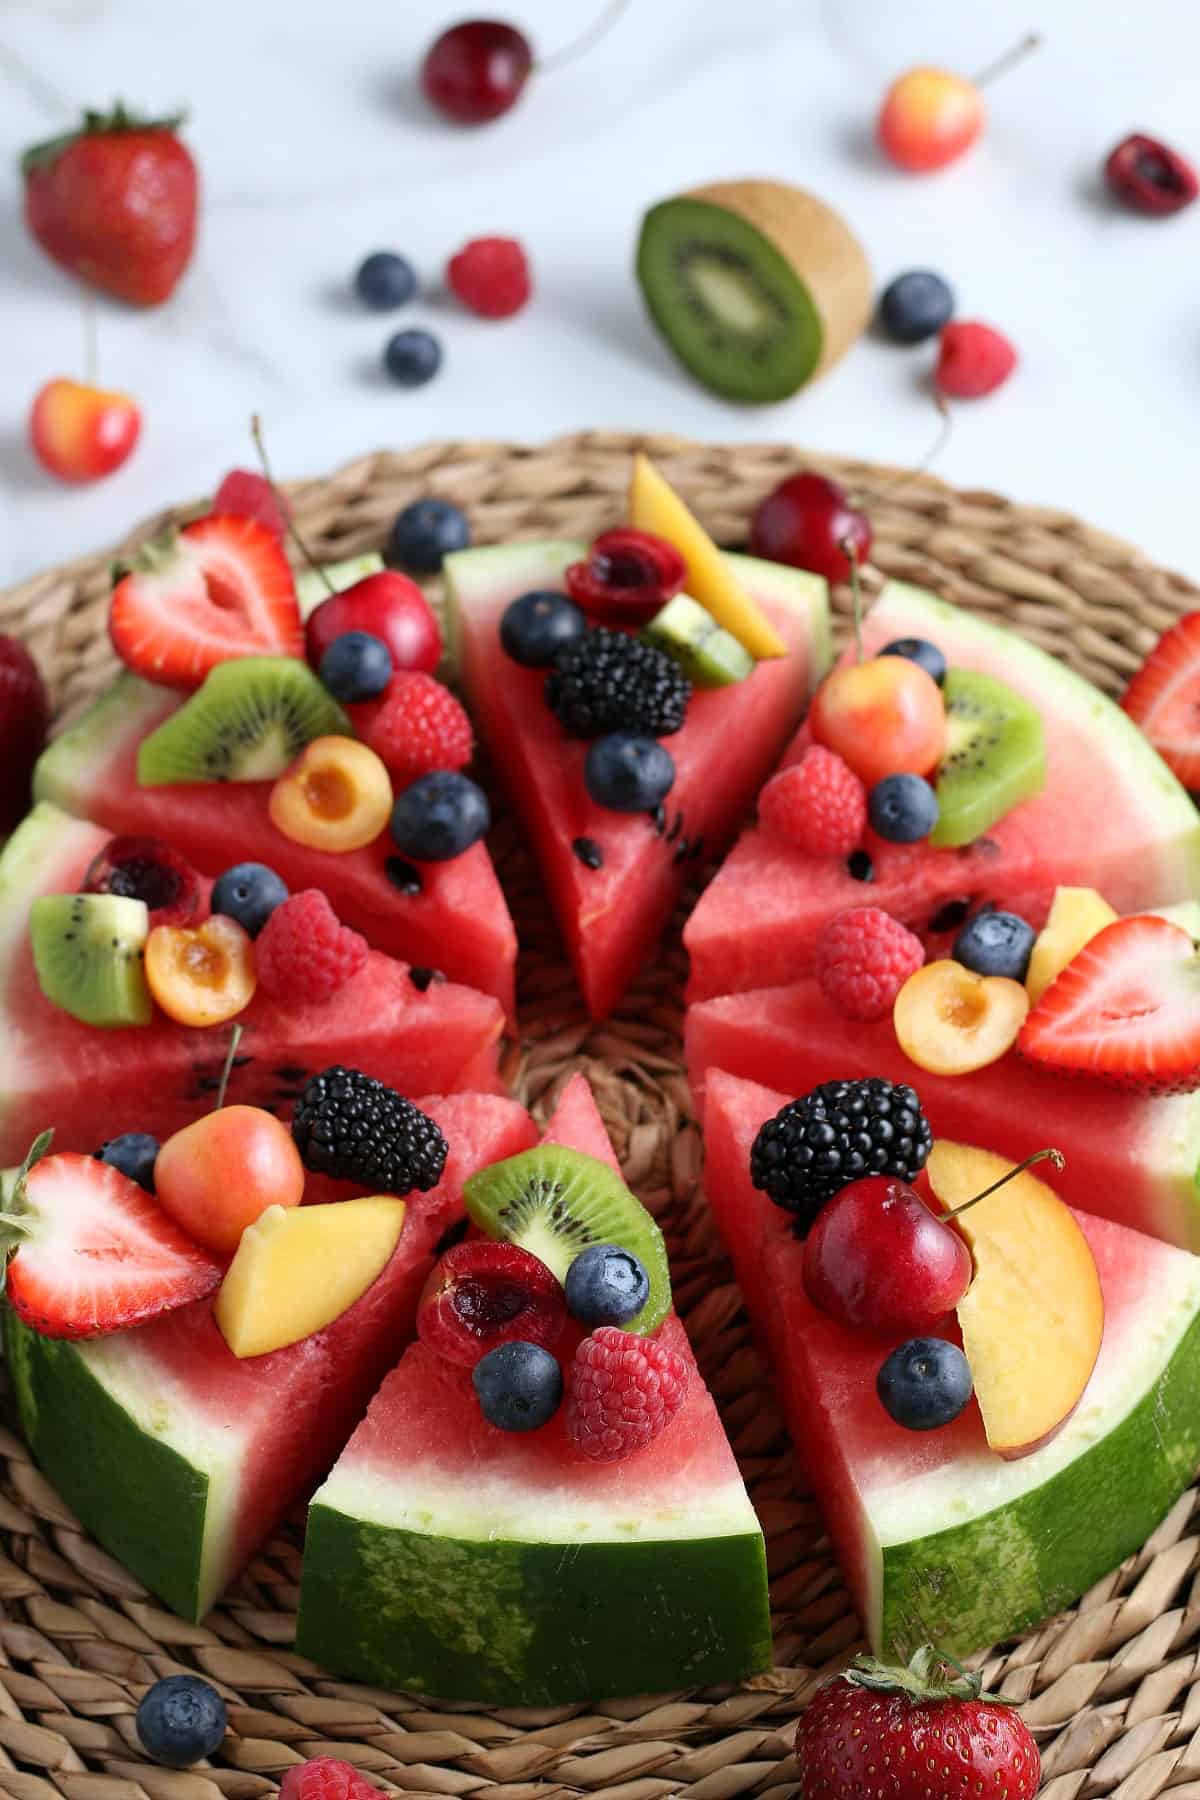 Angled thick slices of watermelon covered with fresh fruit pieces and then sliced into wedges for serving. All on a woven mat.